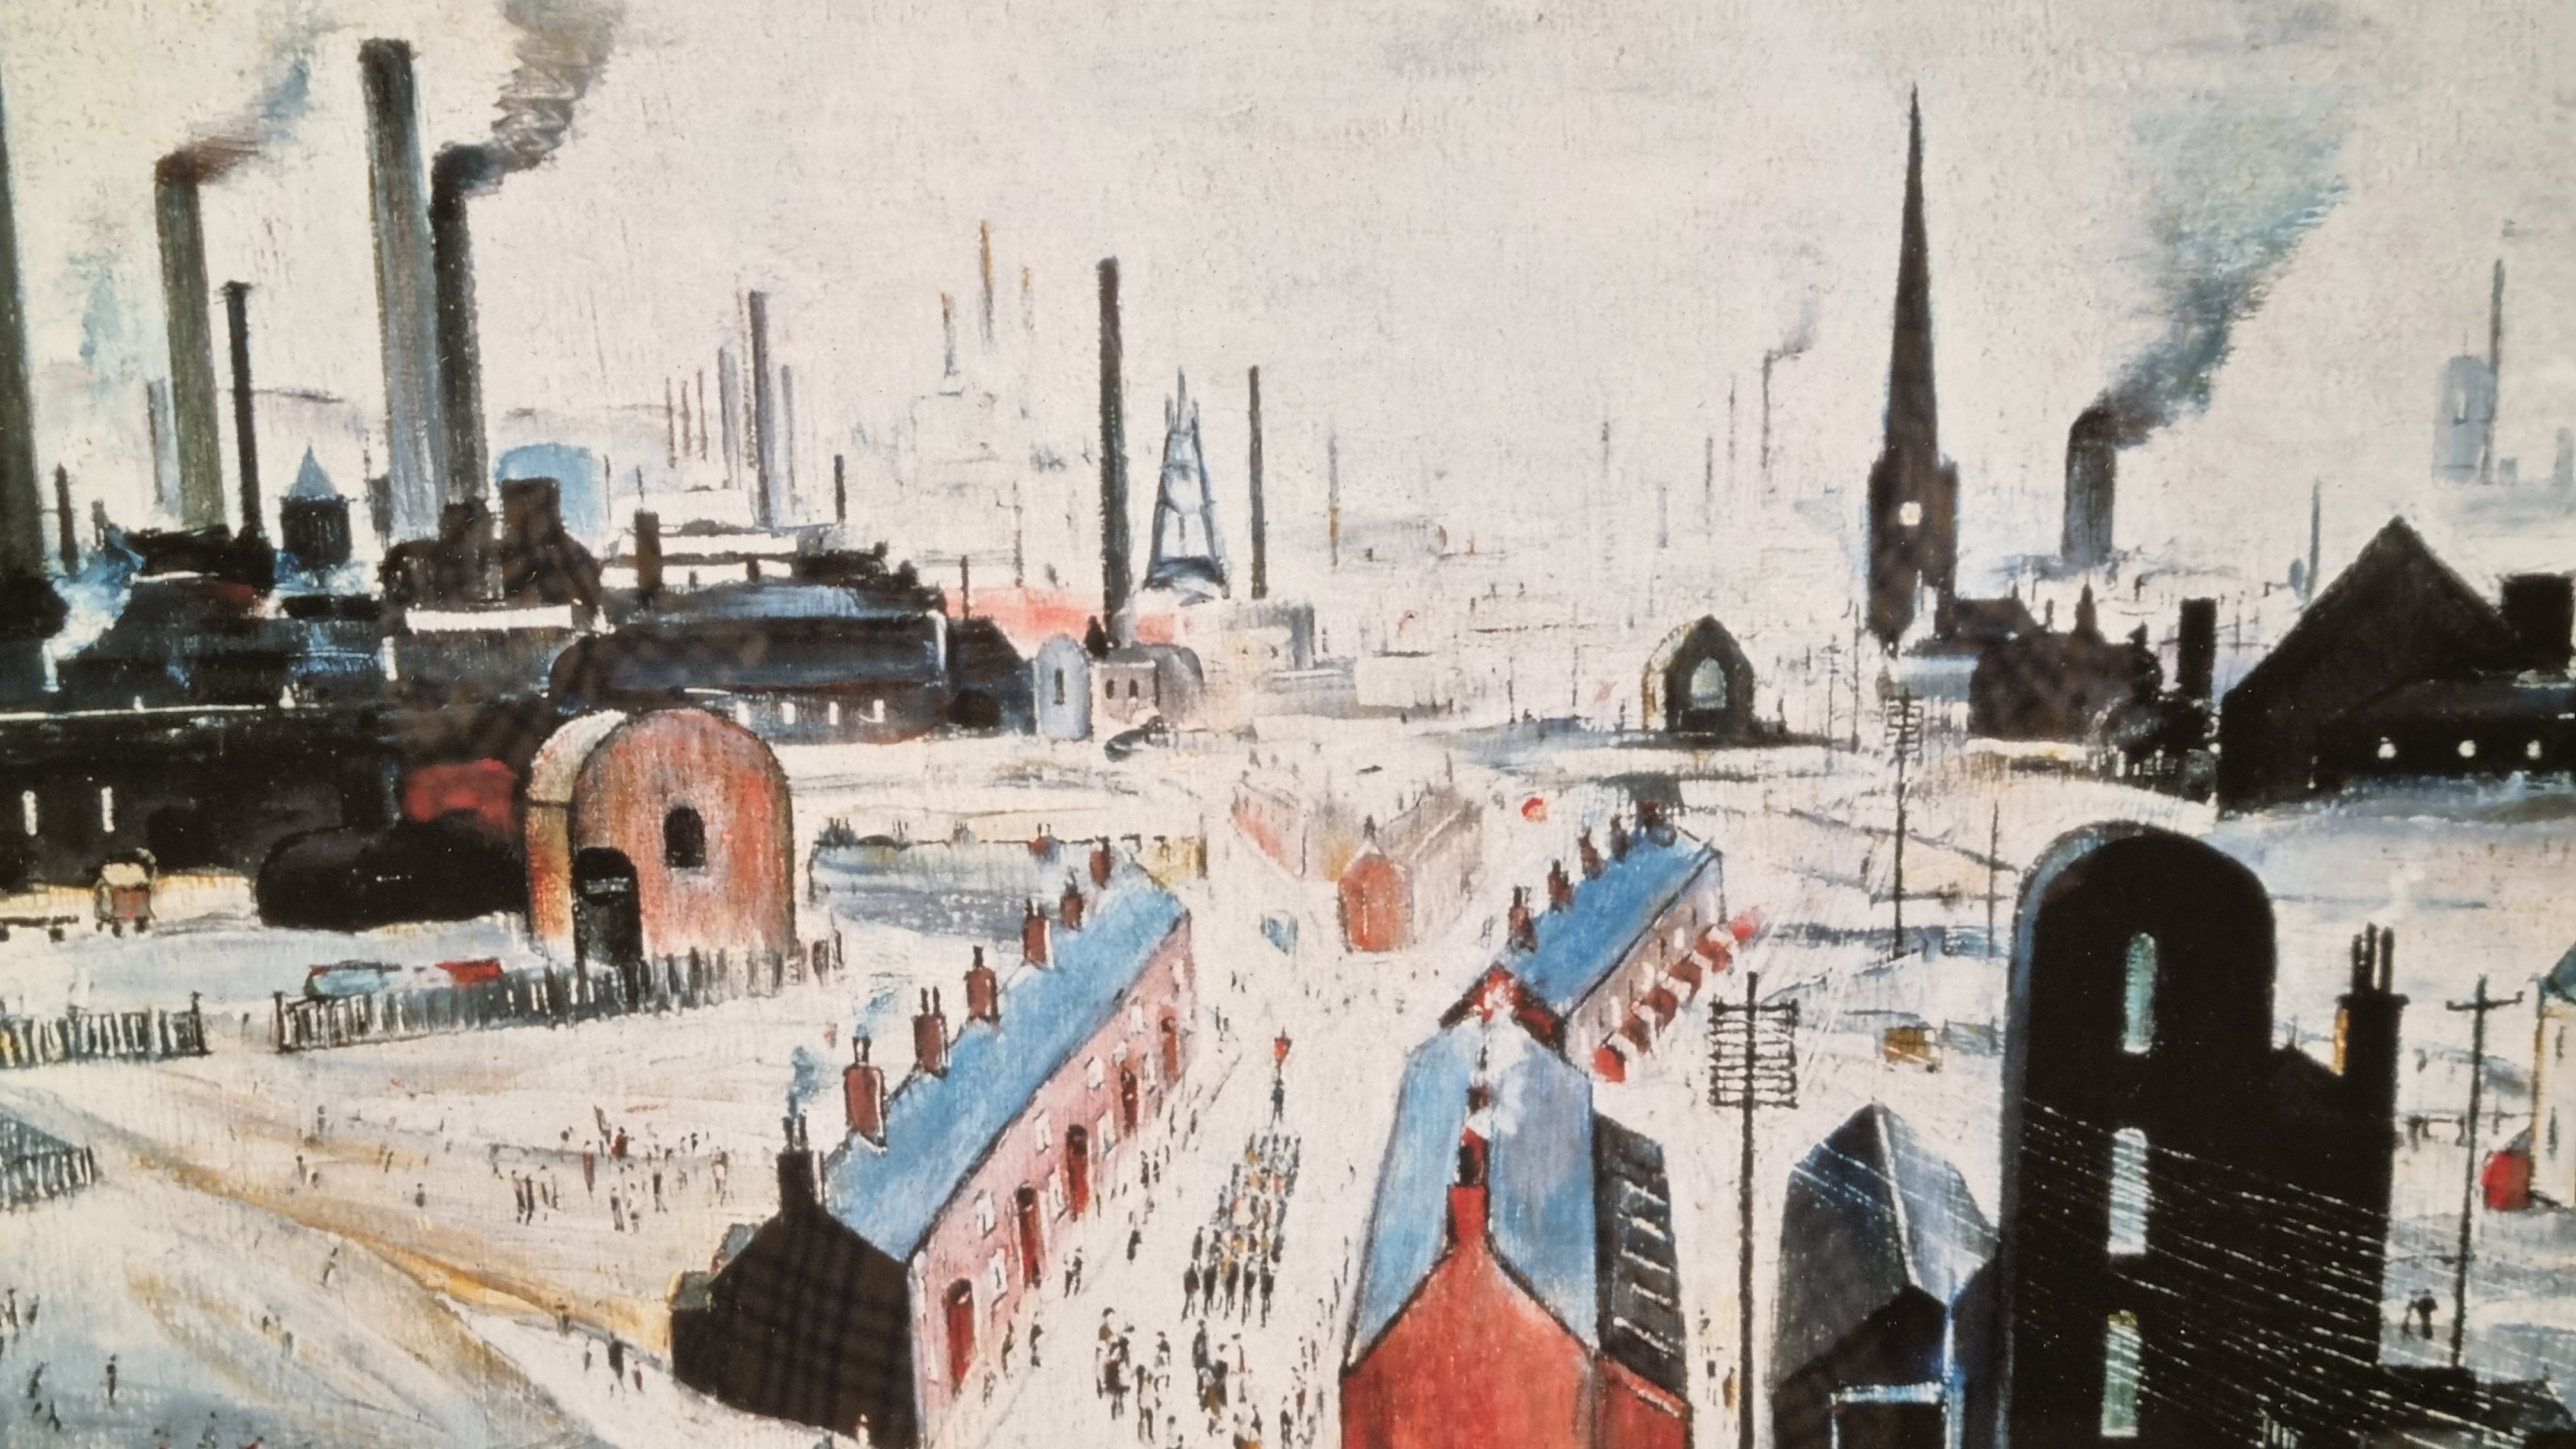 Limited Edition by L.S. Lowry titled "The Canal Bridge, 1949". - Image 5 of 6